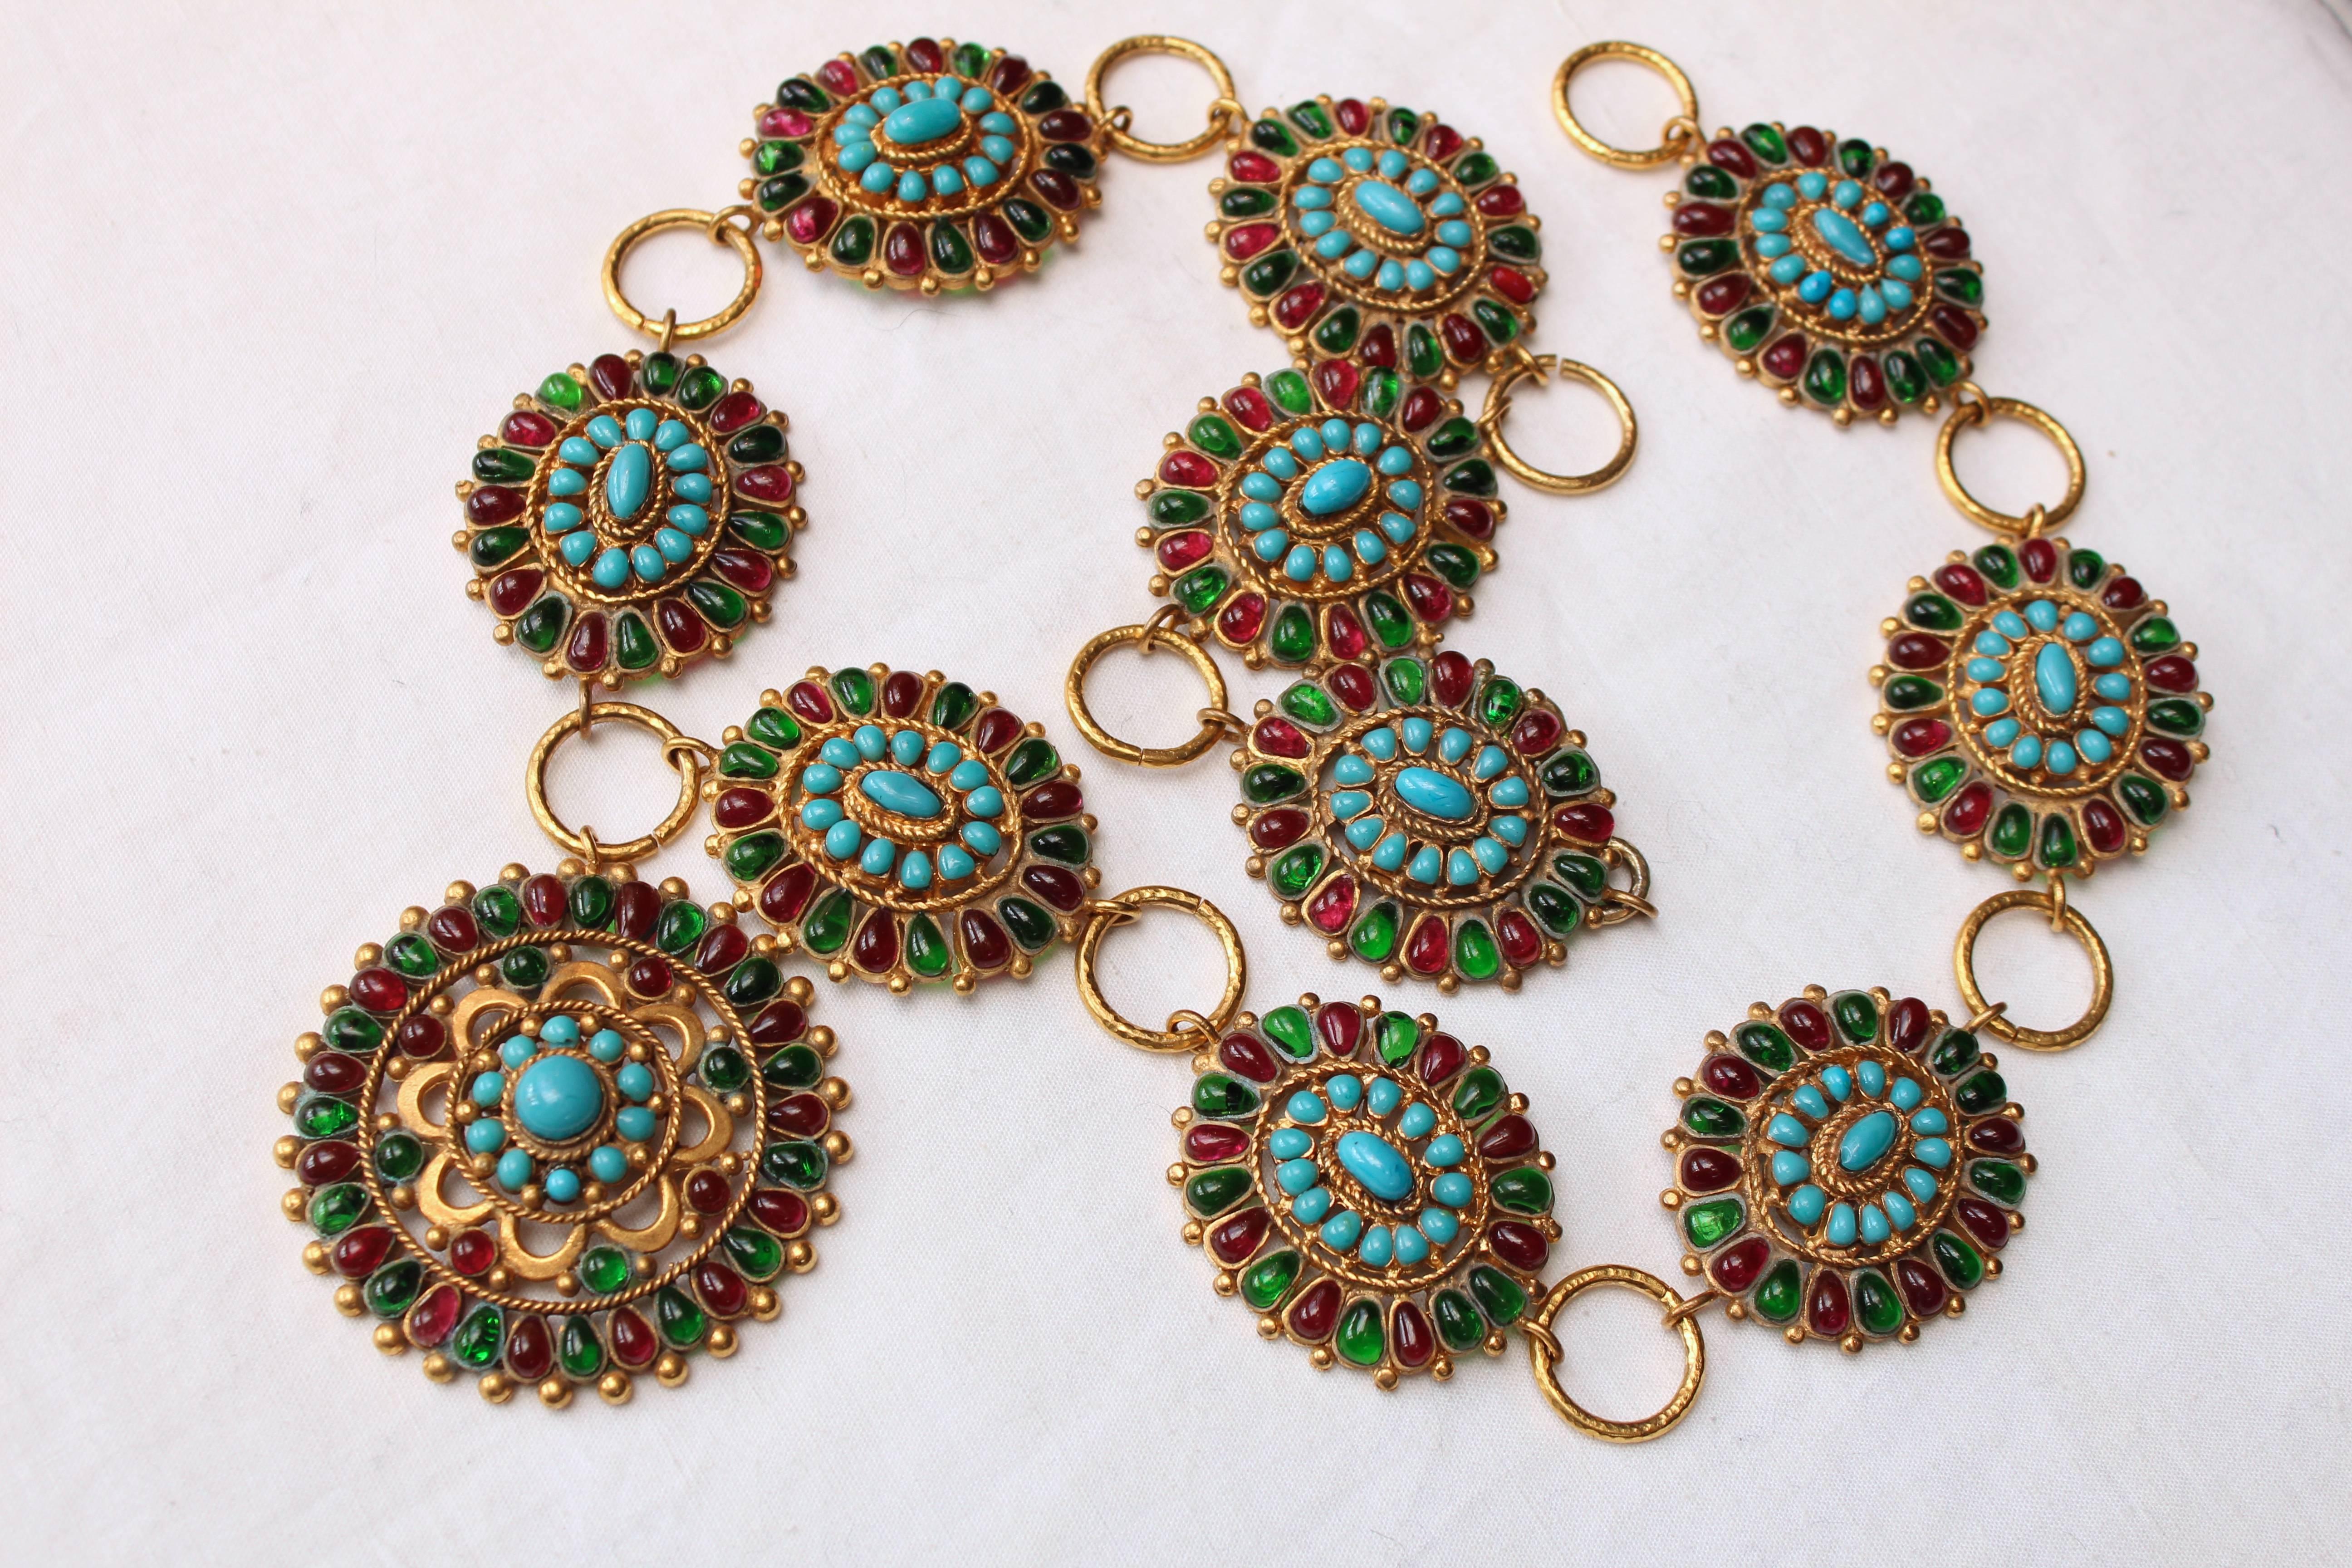 1993 Exceptional Chanel by Gripoix Byzantine Statement Necklace In Excellent Condition For Sale In Paris, FR